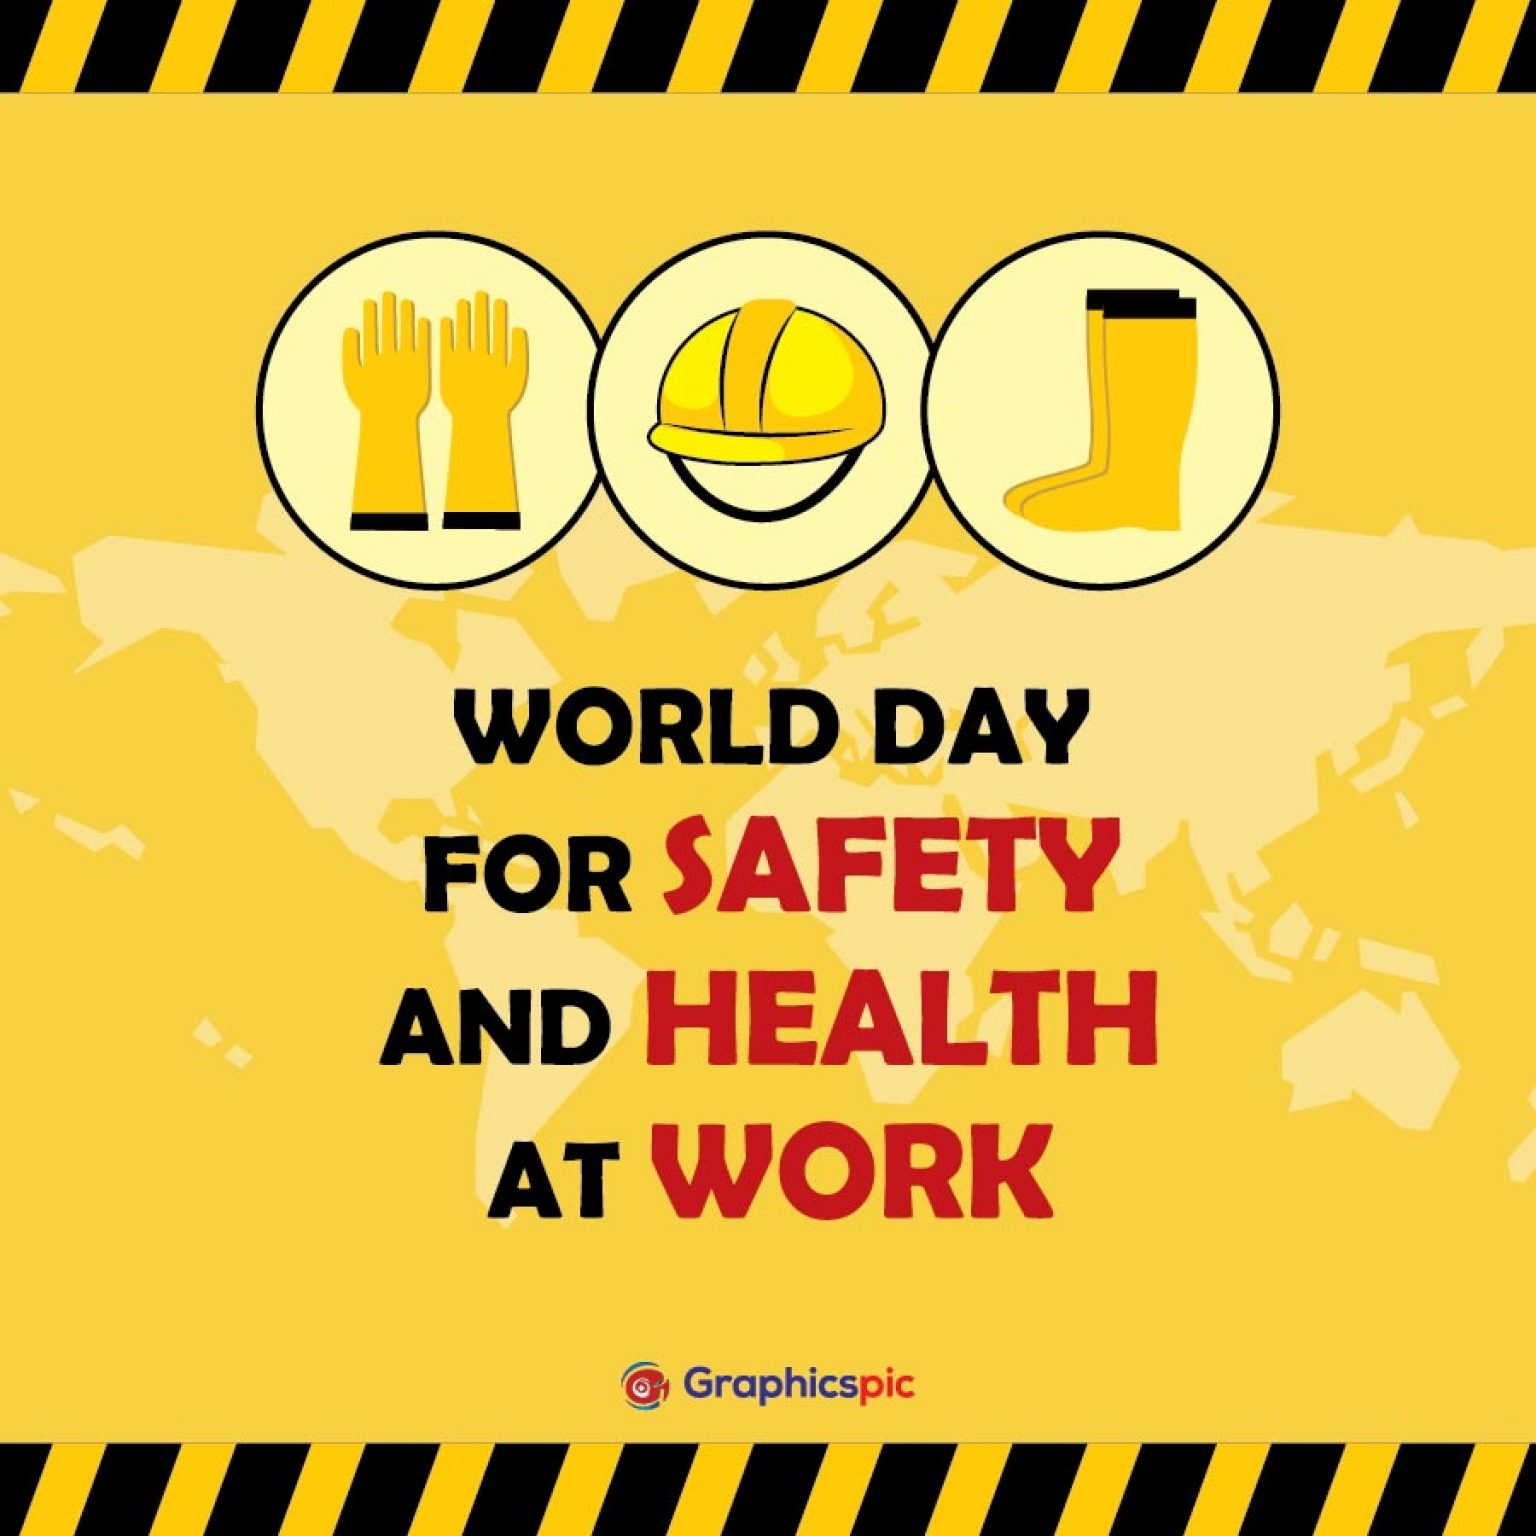 World day for safety and health at work with with world map & safety